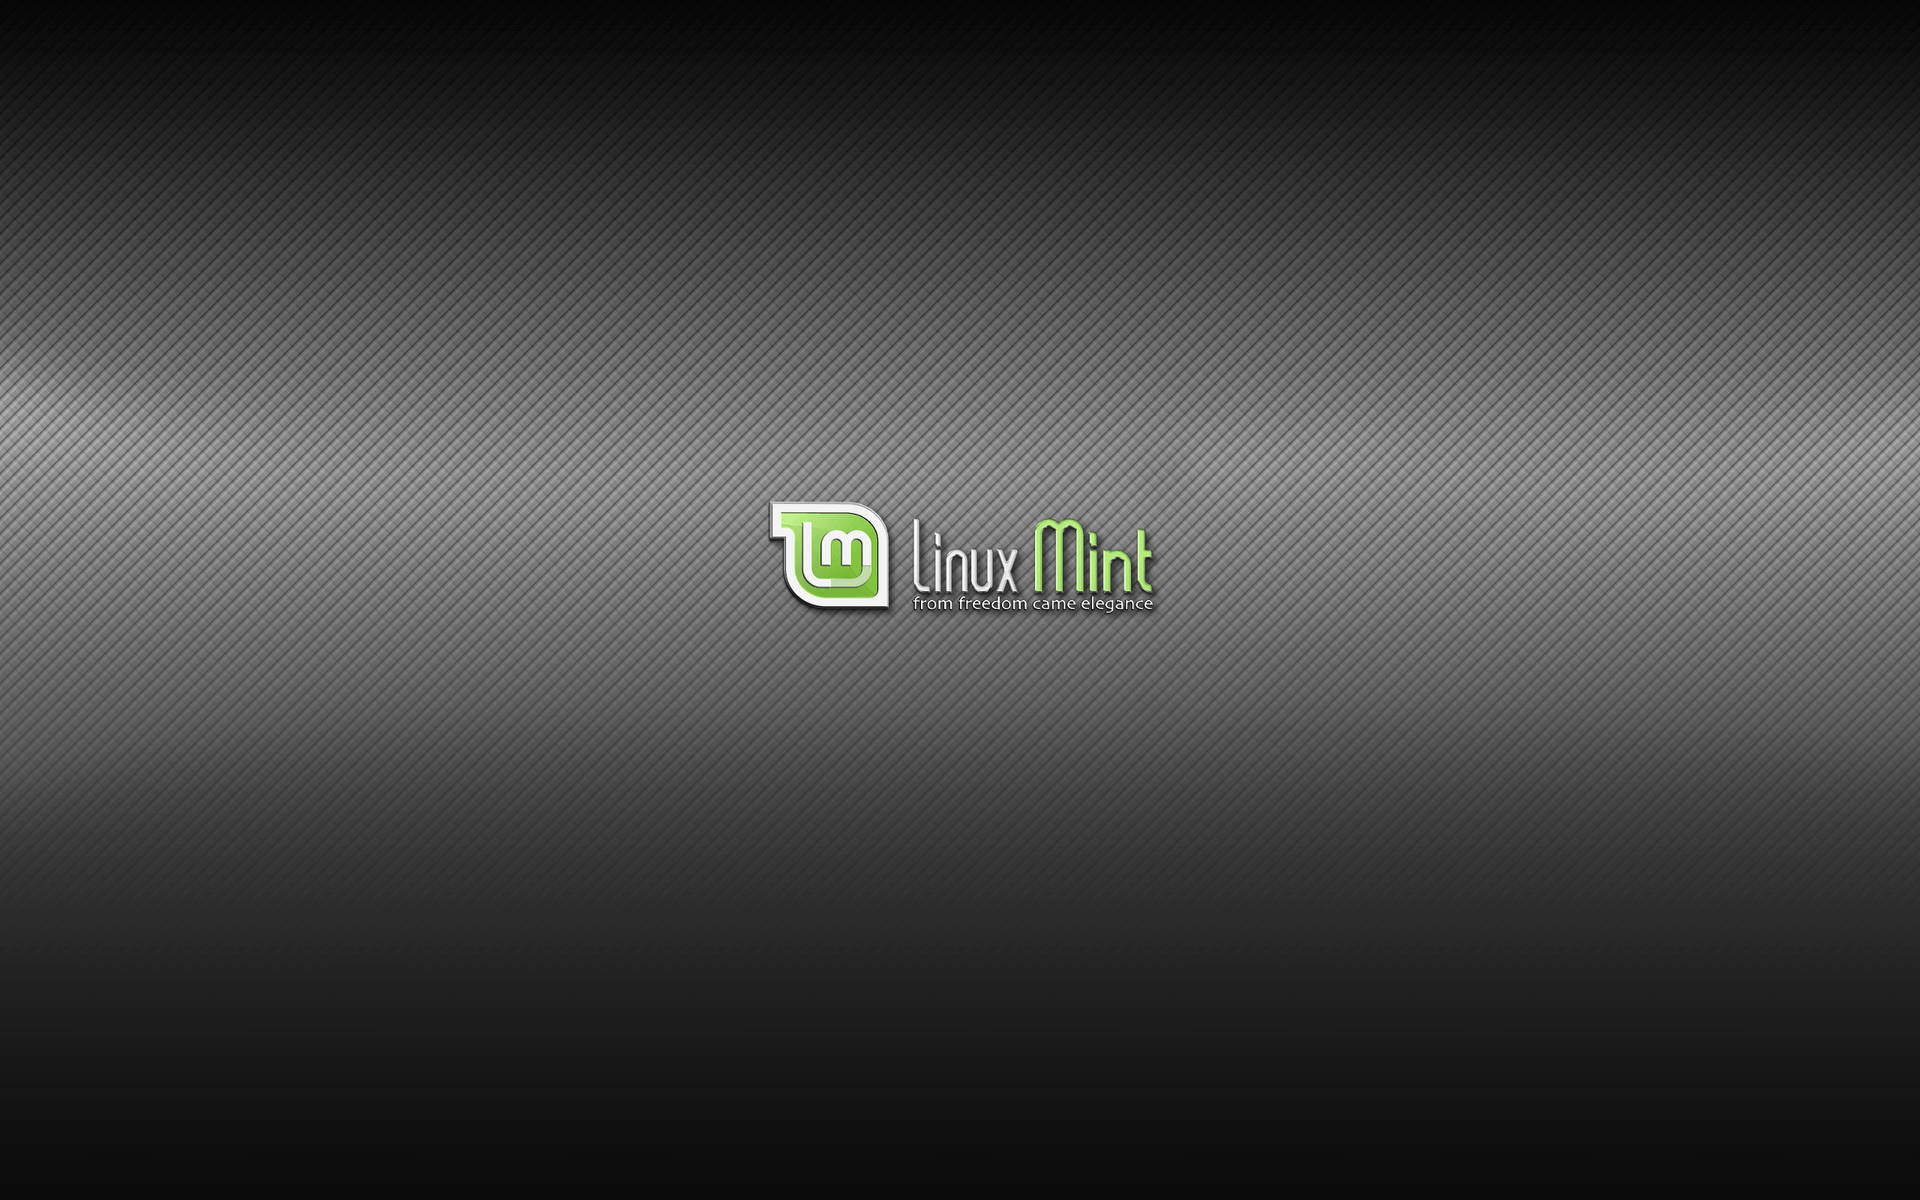 Operating System Linux Mint Logo Textured Backdrop Background